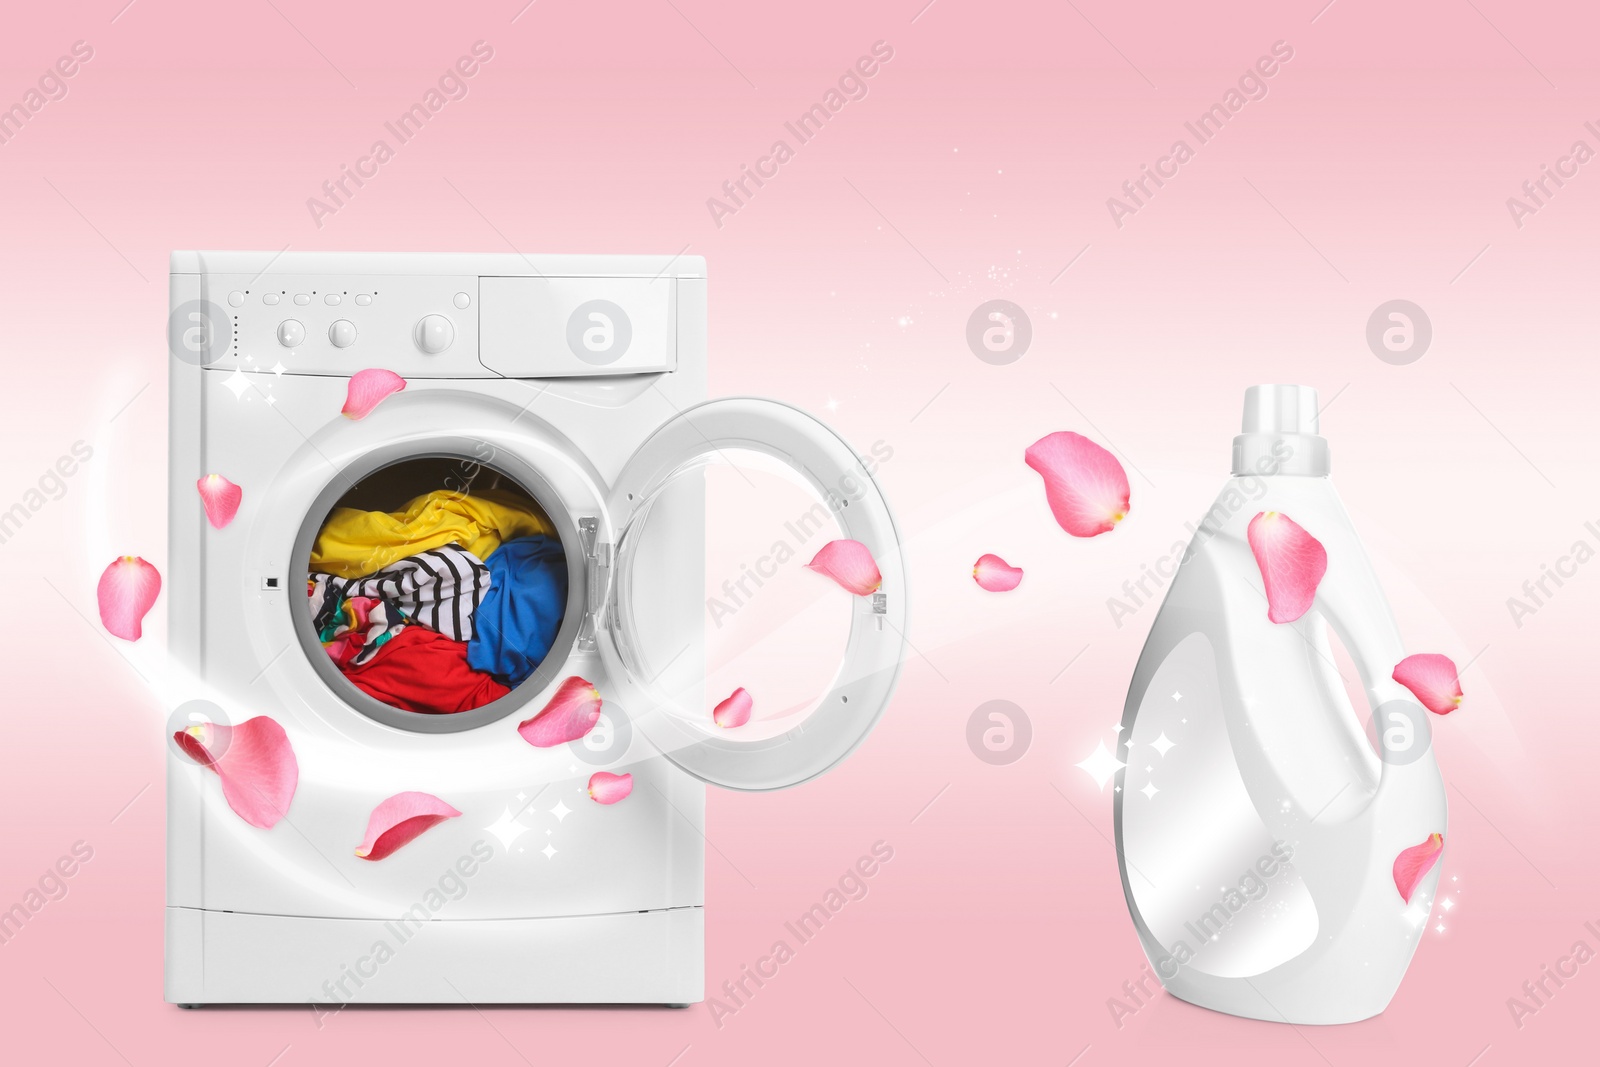 Image of Fabric softener advertising design. Flower petals flying around bottle of conditioner and open washing machine on pink background